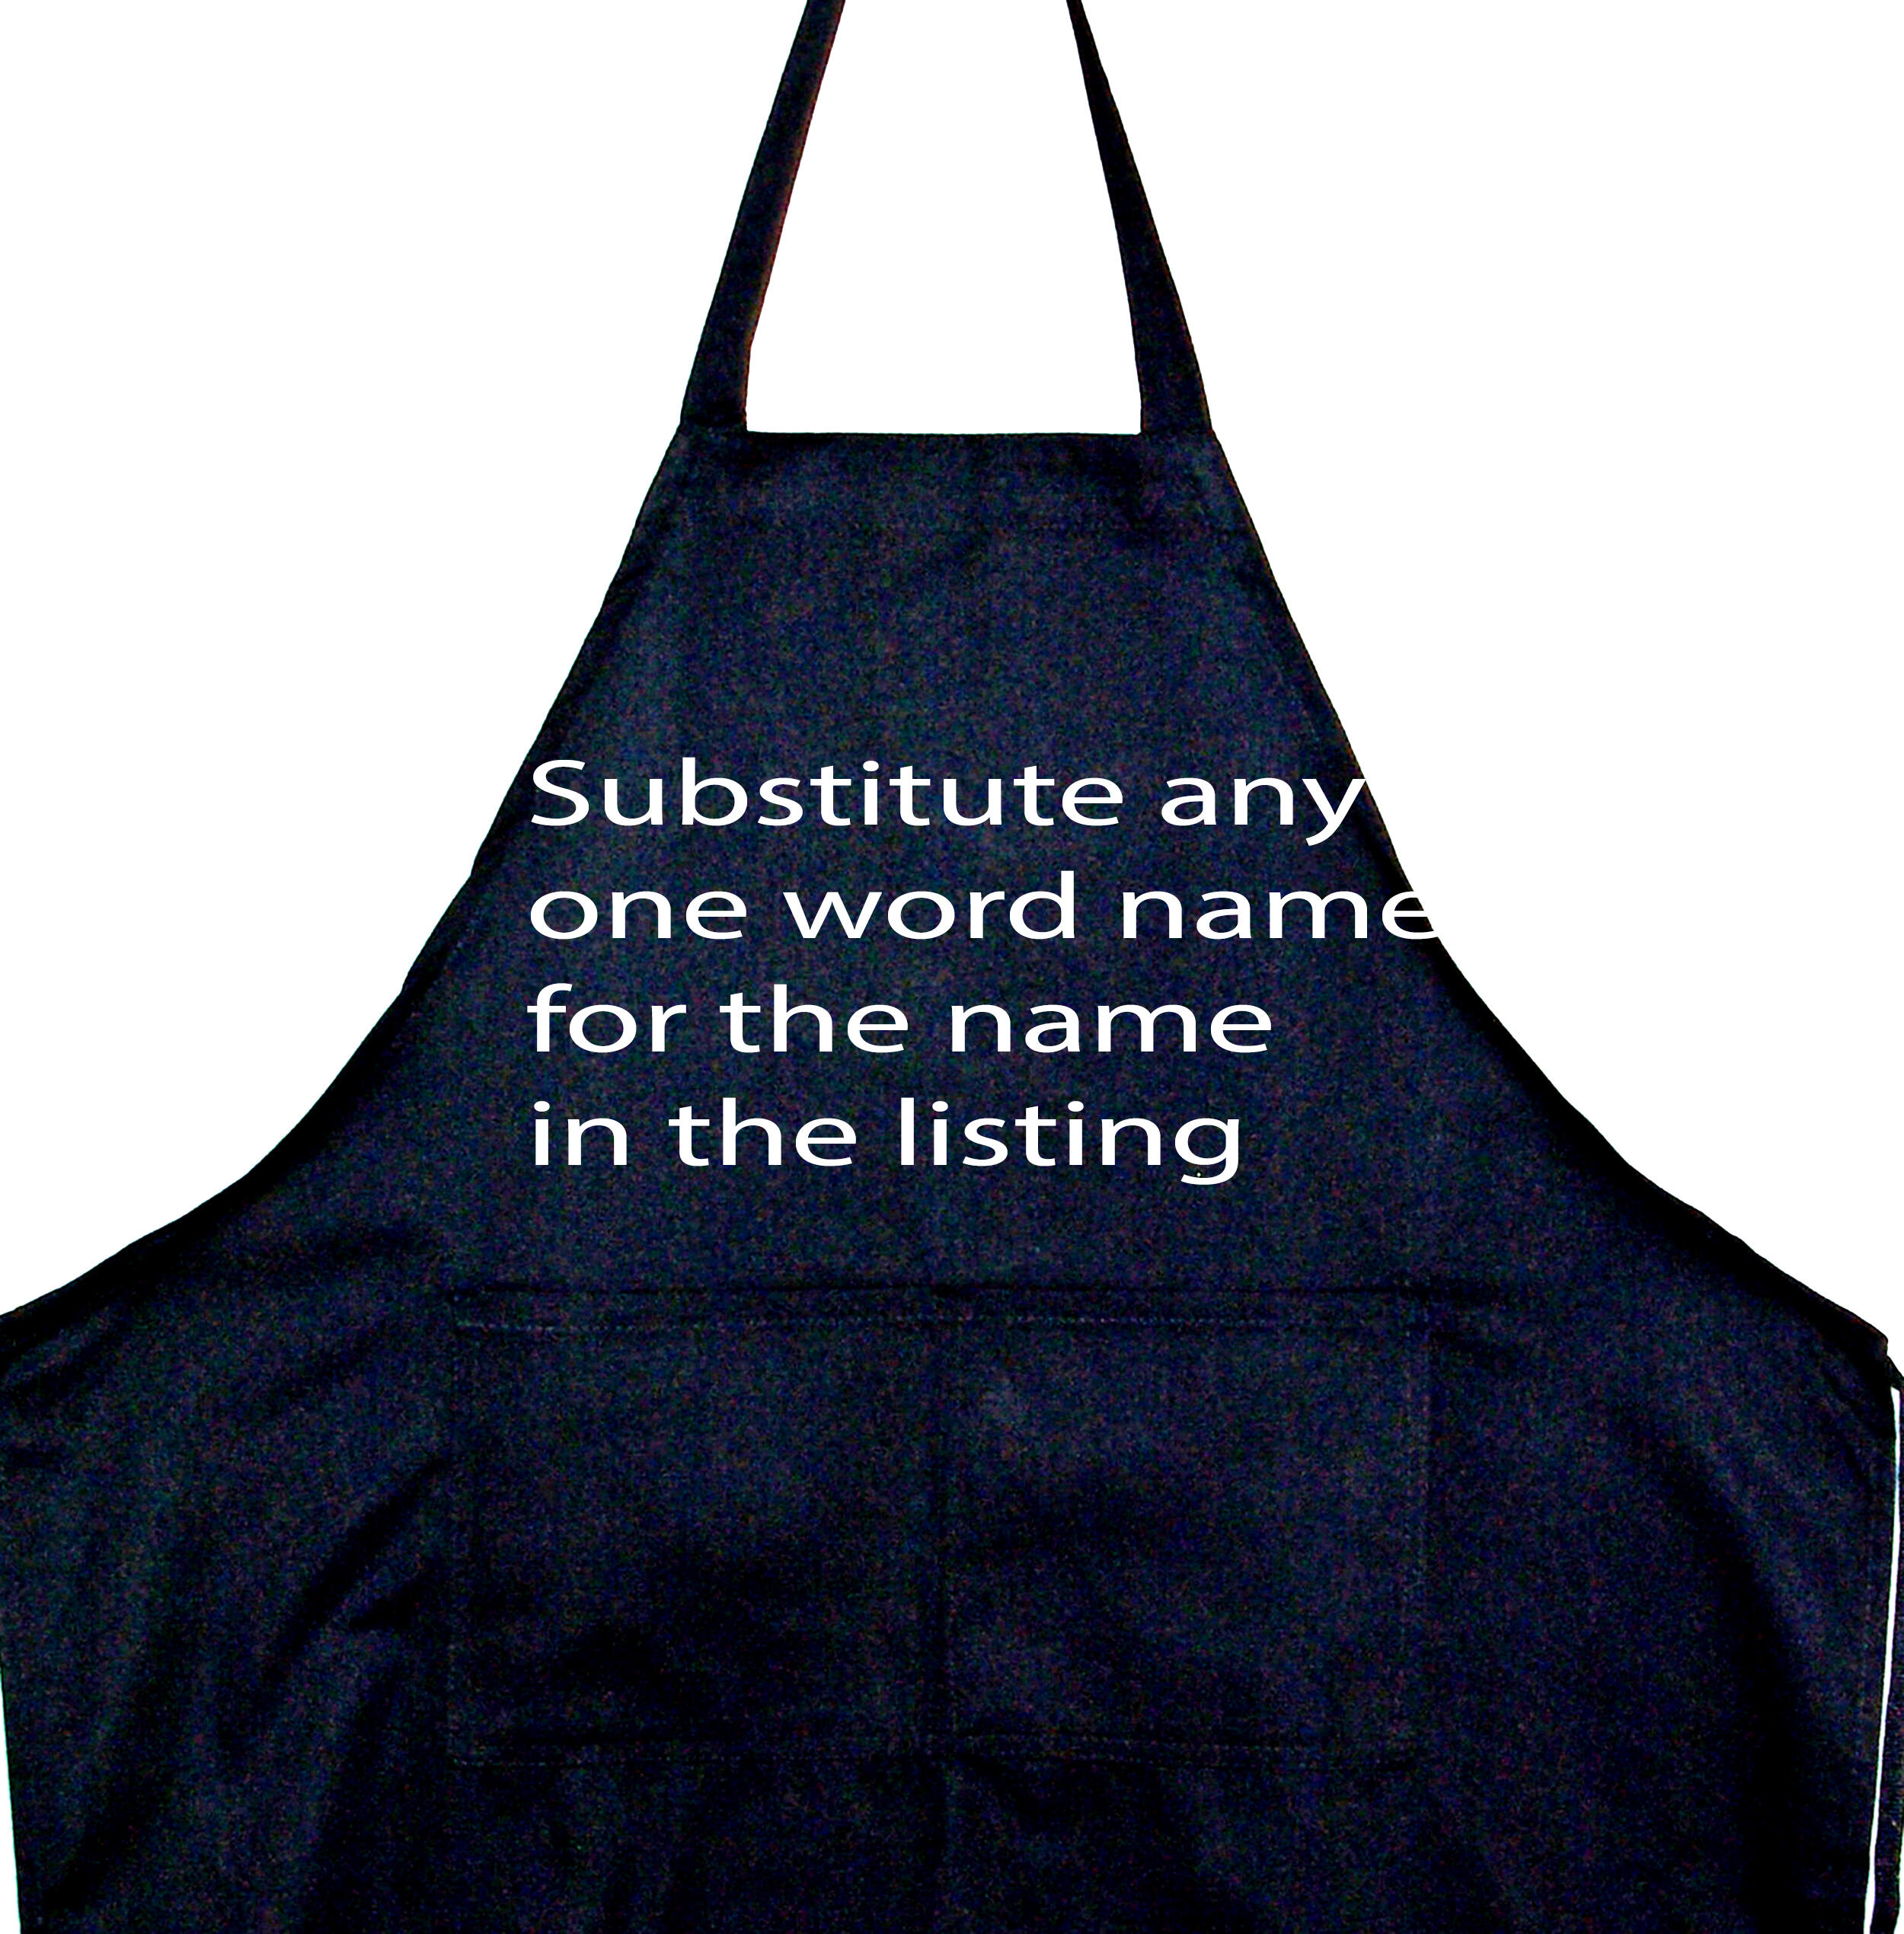 Trophy Husband Apron, Will Cook For Sex, Funny Custom Personalized Birthday Gift, Groom, Partner, Husband, Partner, Ships TODAY, AGFT picture